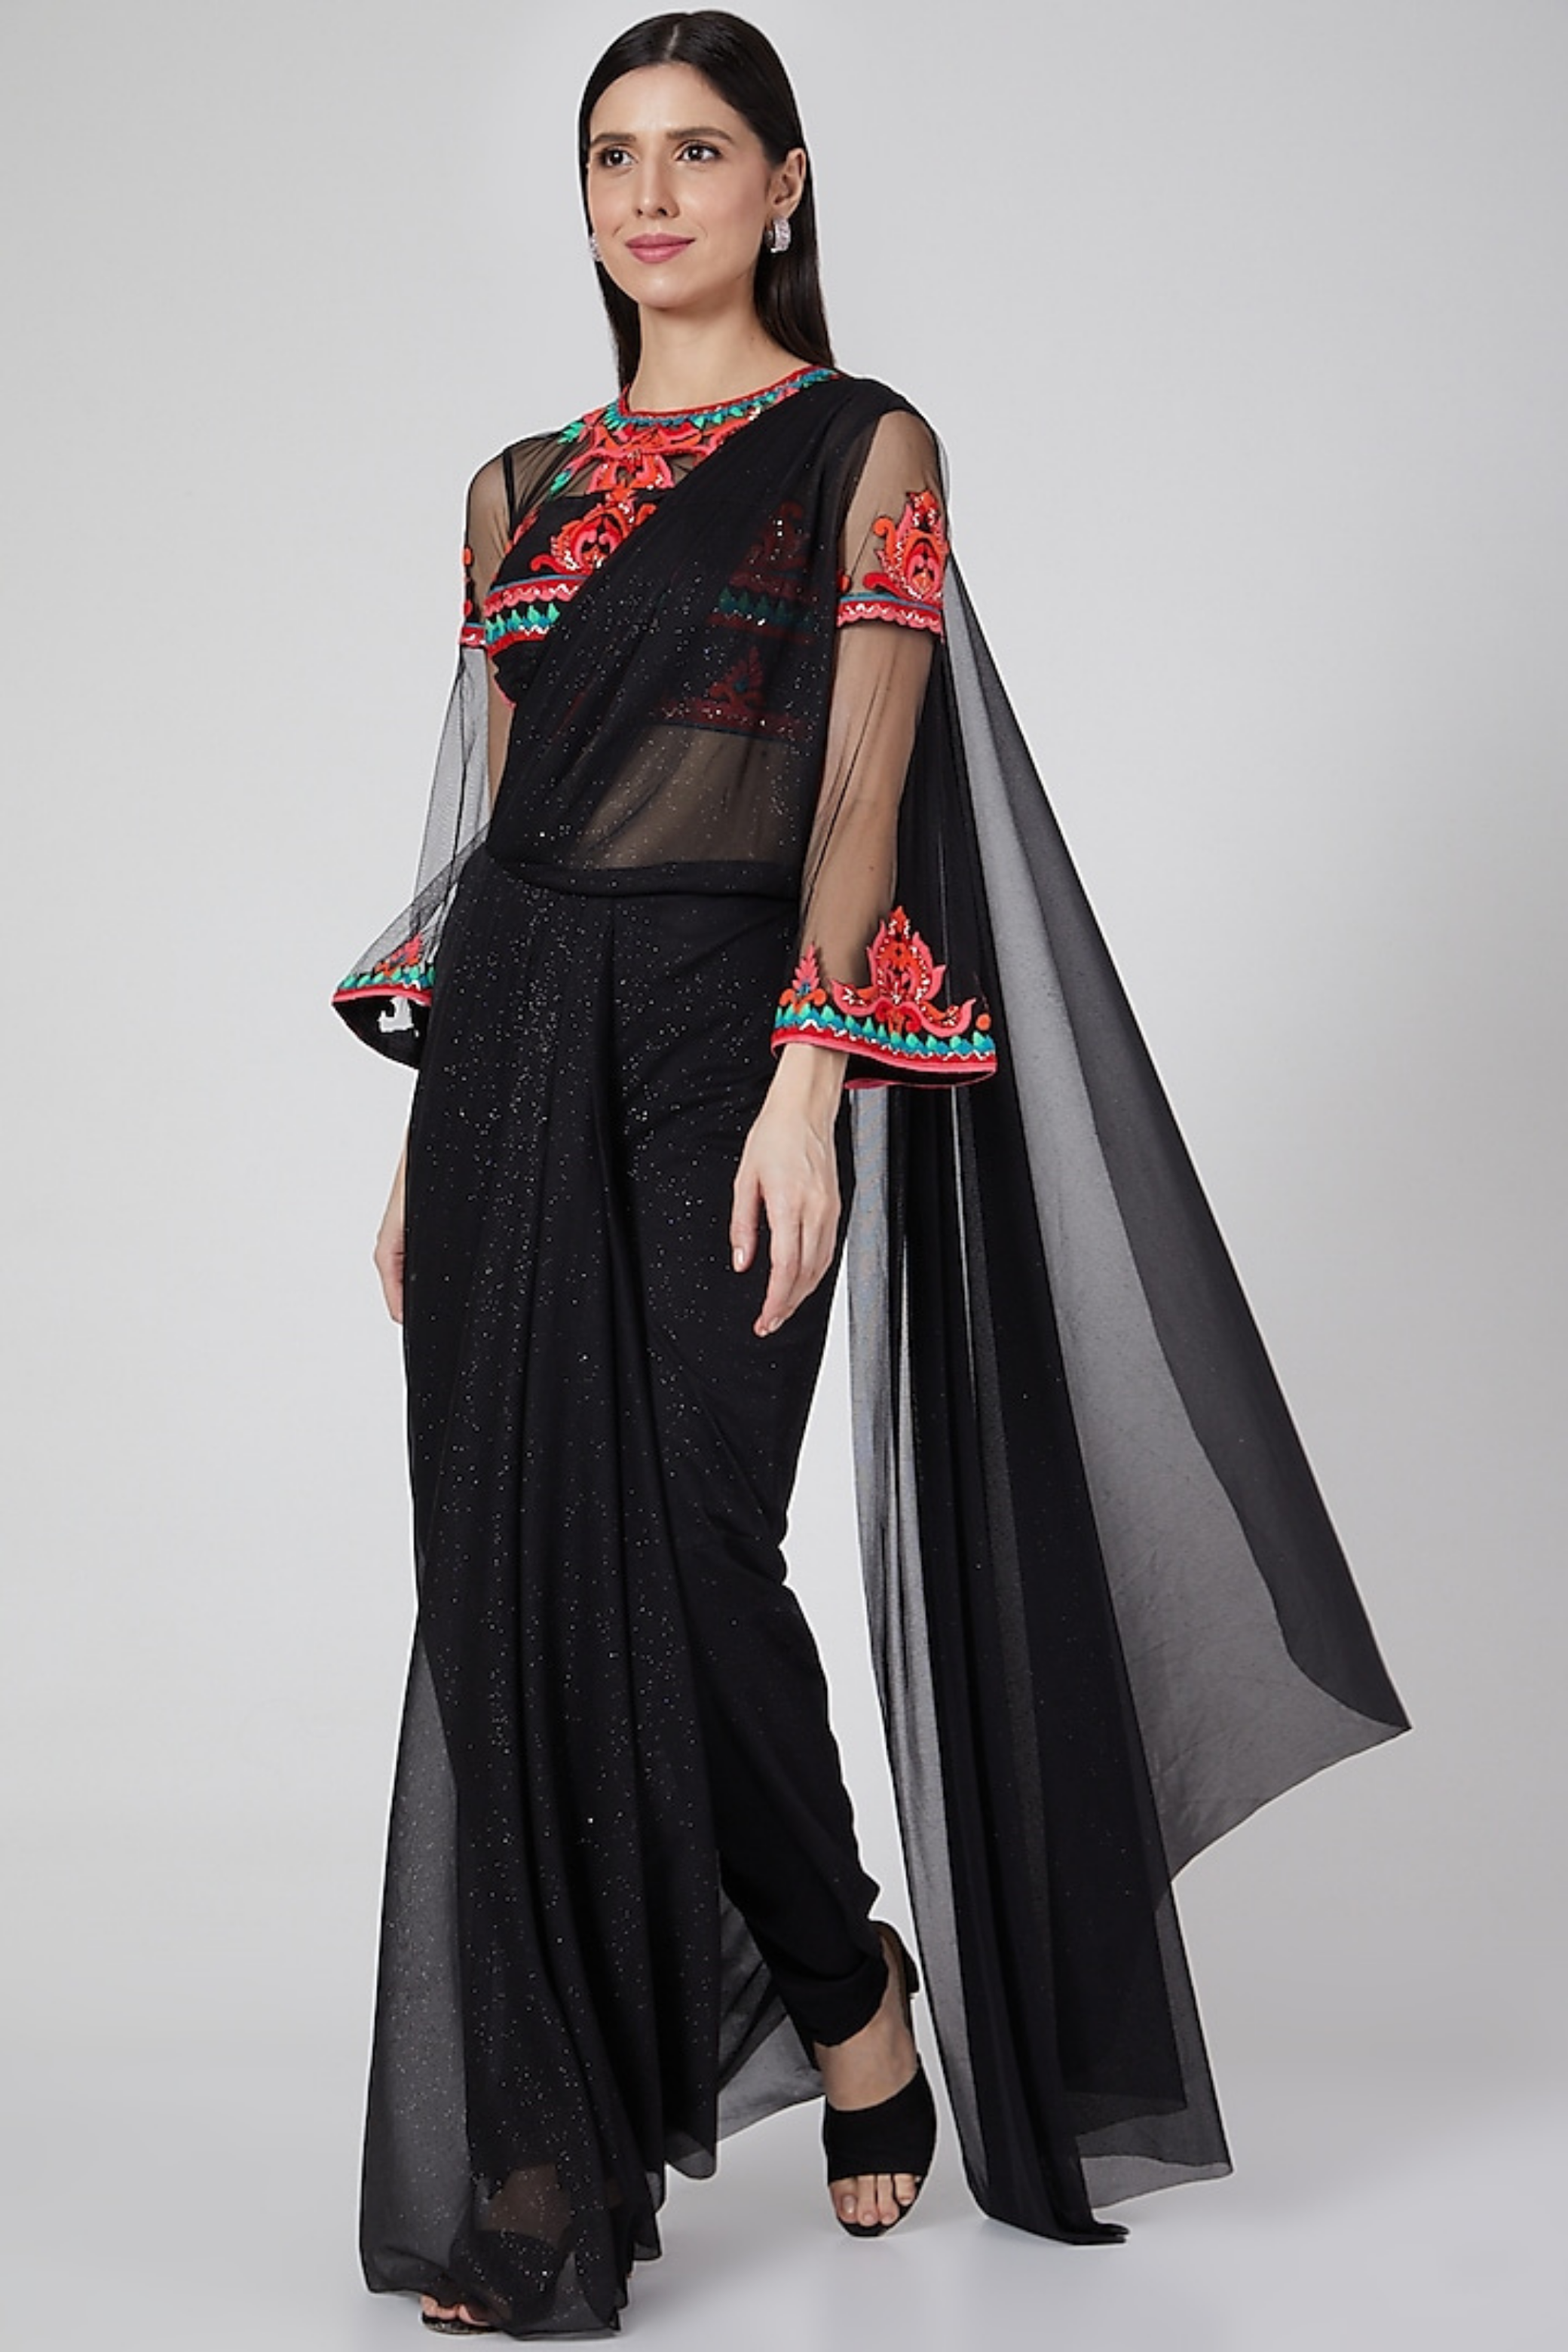 Black Draped Pant Sari with Embroidered Blouse